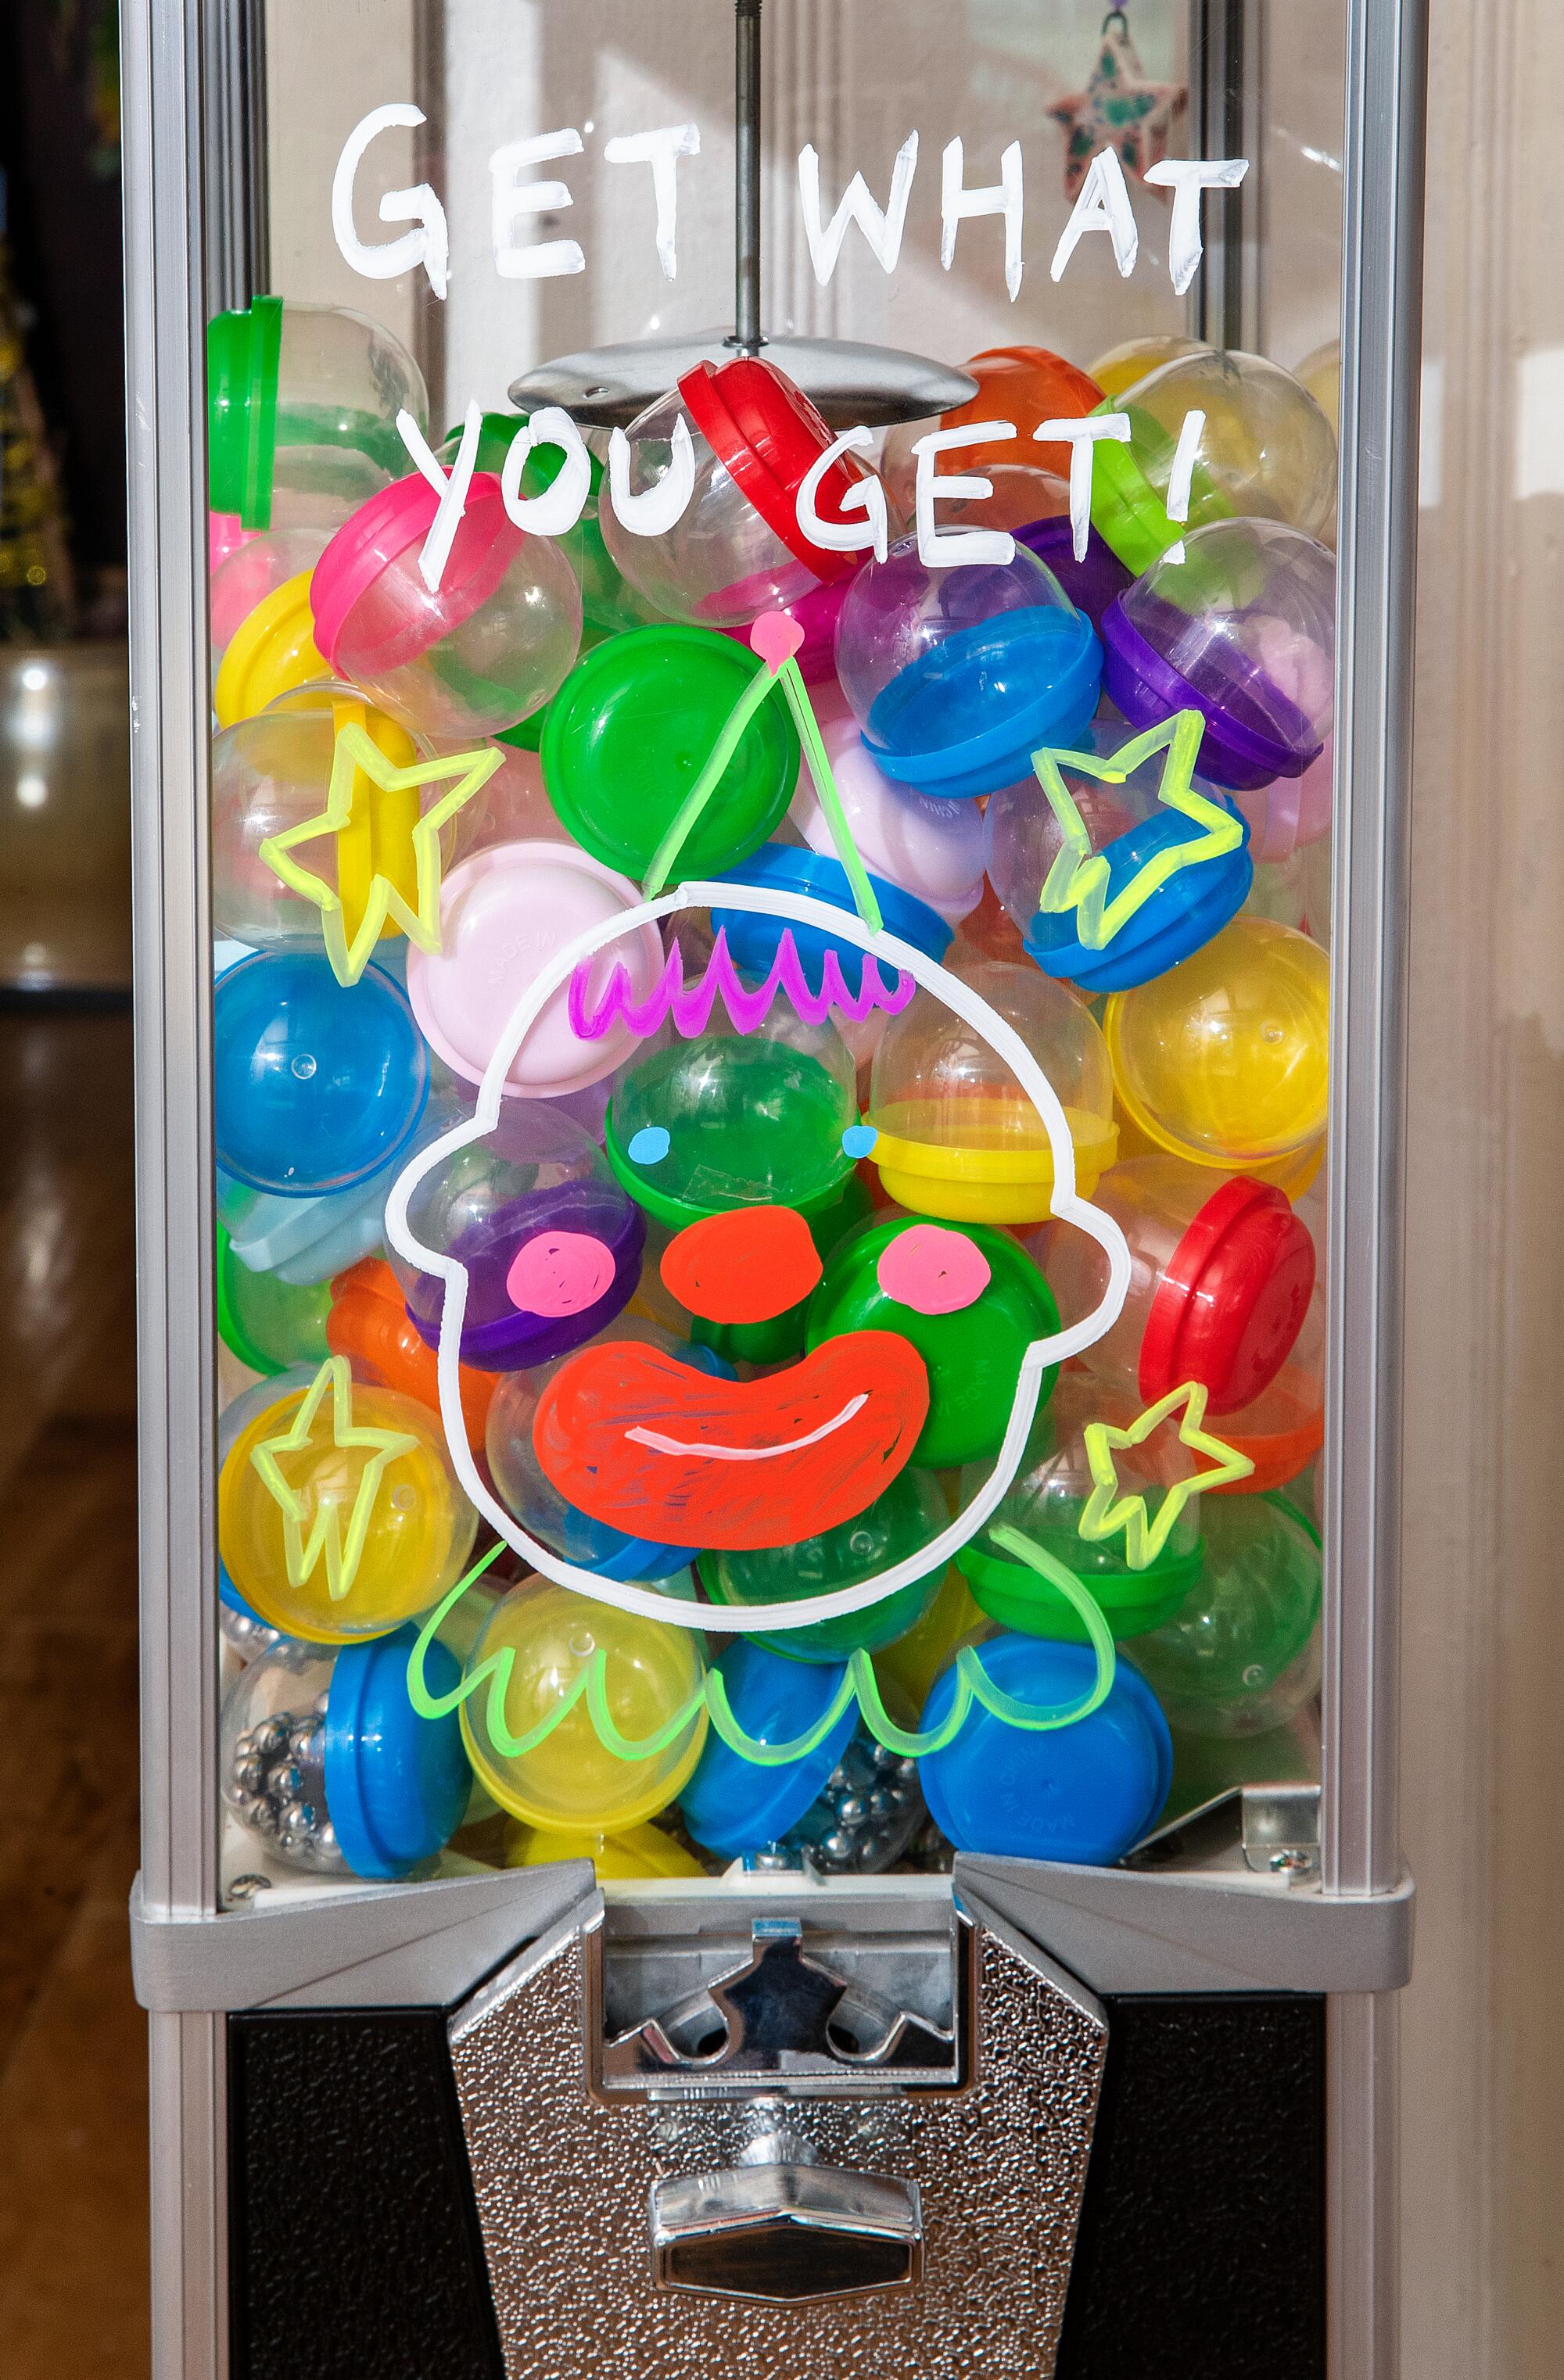 A "Get What You Get" dispenser is located at Yousefi's home studio.